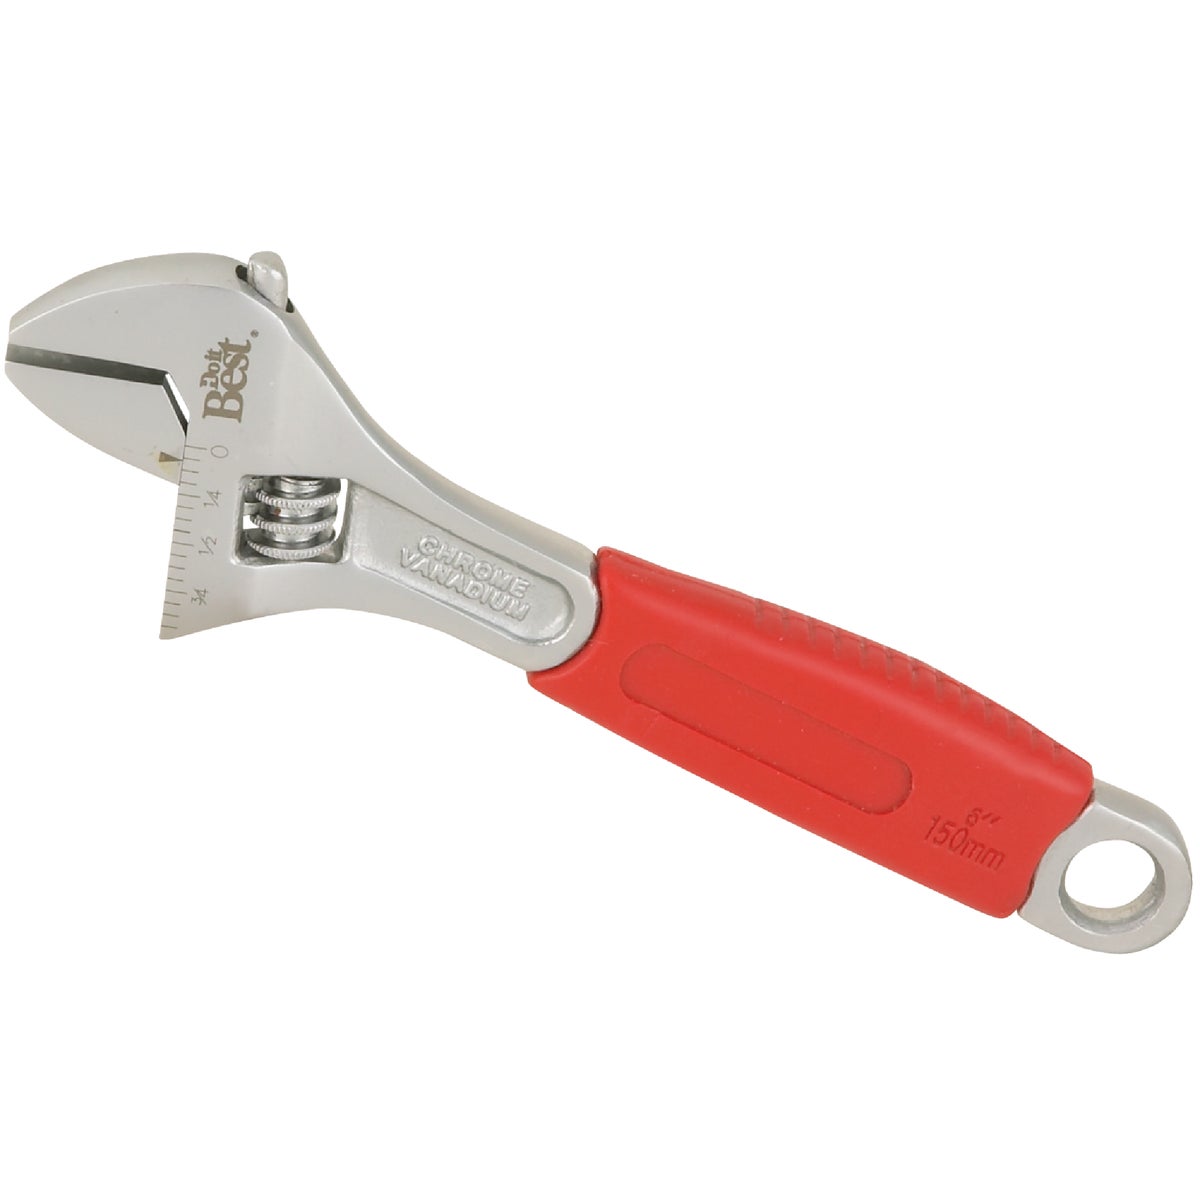 Item 333614, These adjustable wrenches are constructed from chrome vanadium steel and 